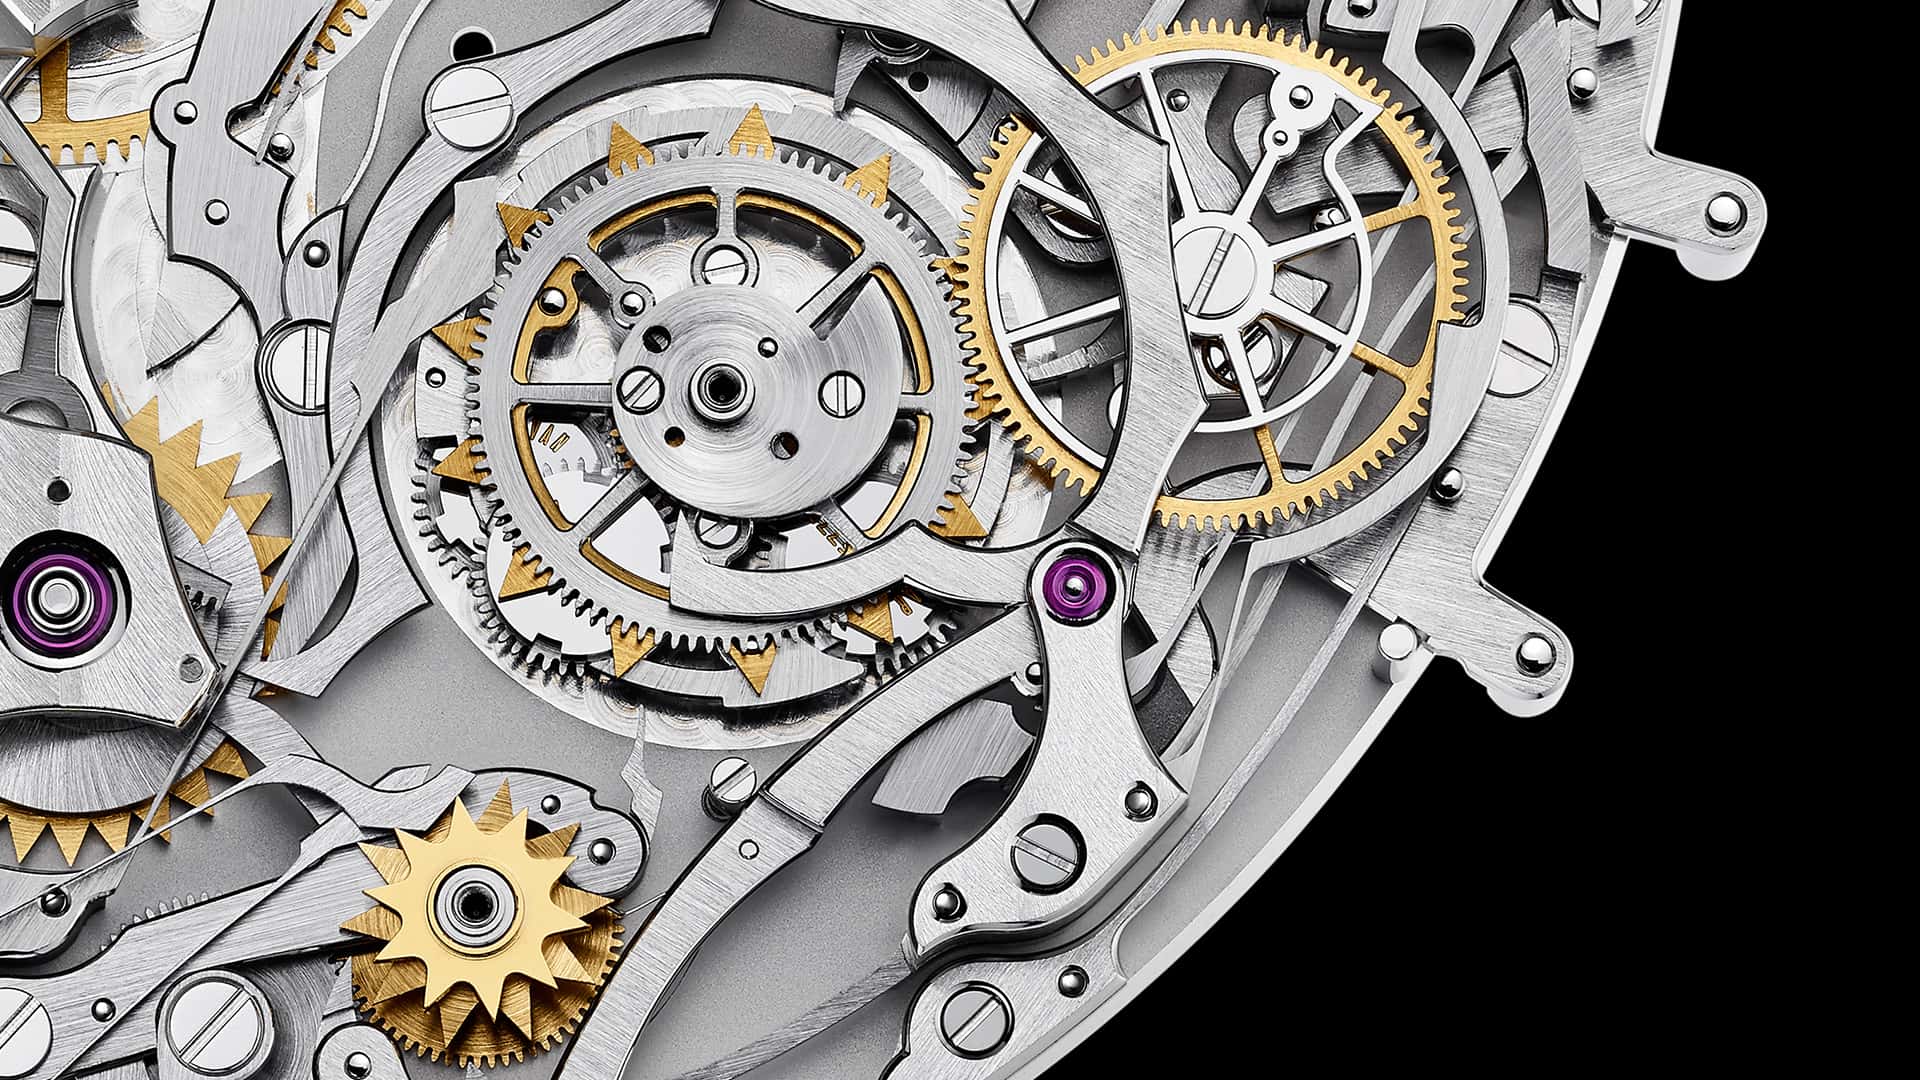 Vacheron-Constantin-Presents-The-Most-Complicated-Watch-in-the-World-With-57-Complications-8.jpg